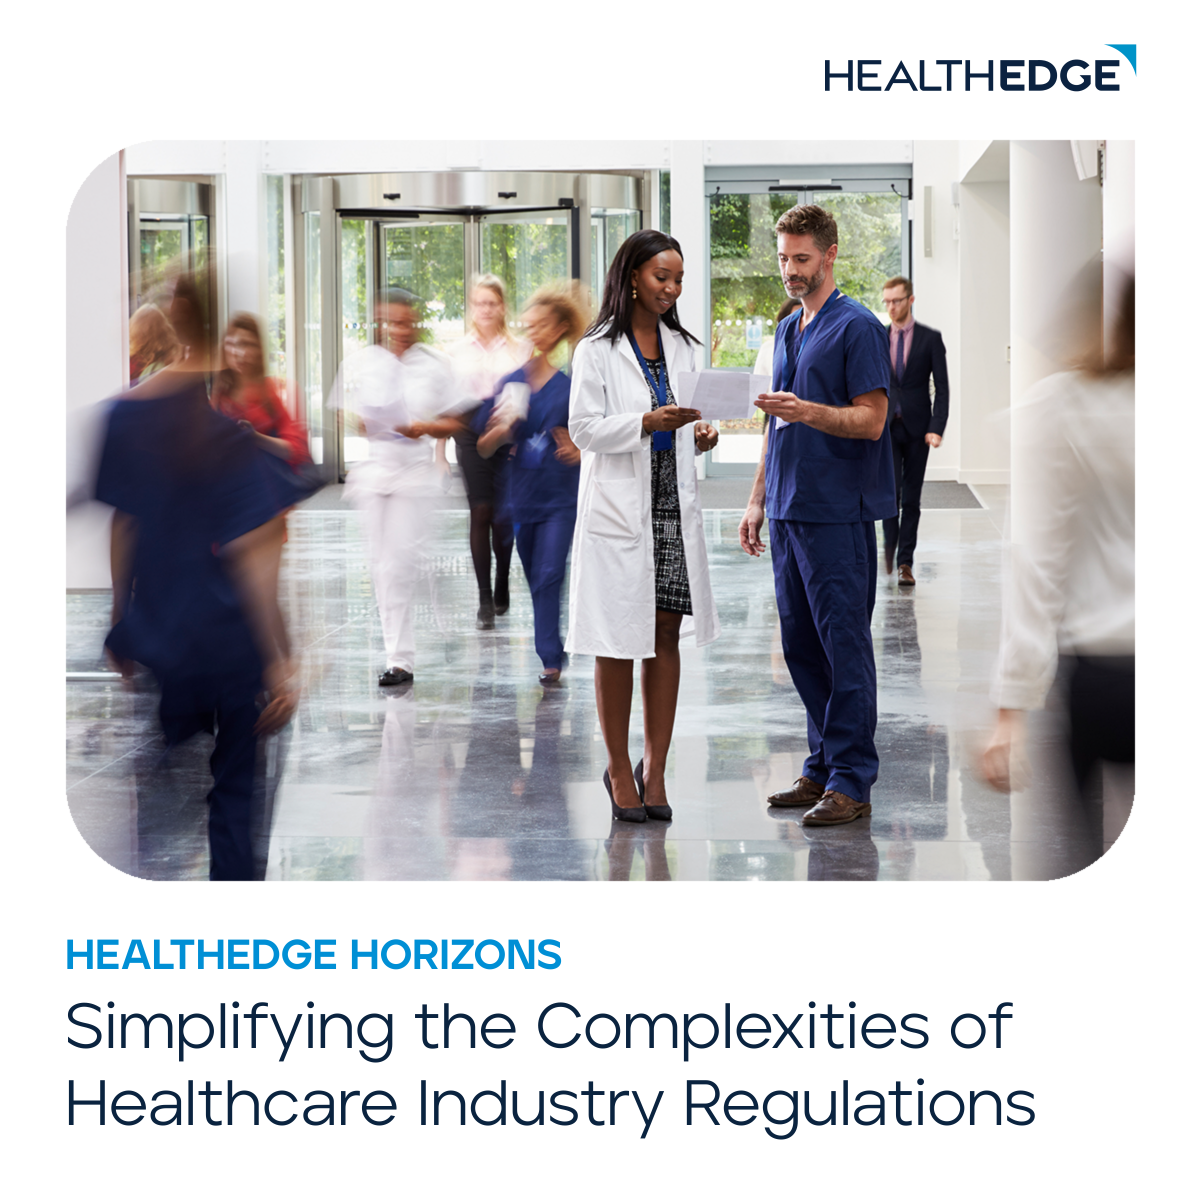 HealthEdge Horizons: Simplifying the Complexities of Healthcare Industry Regulations